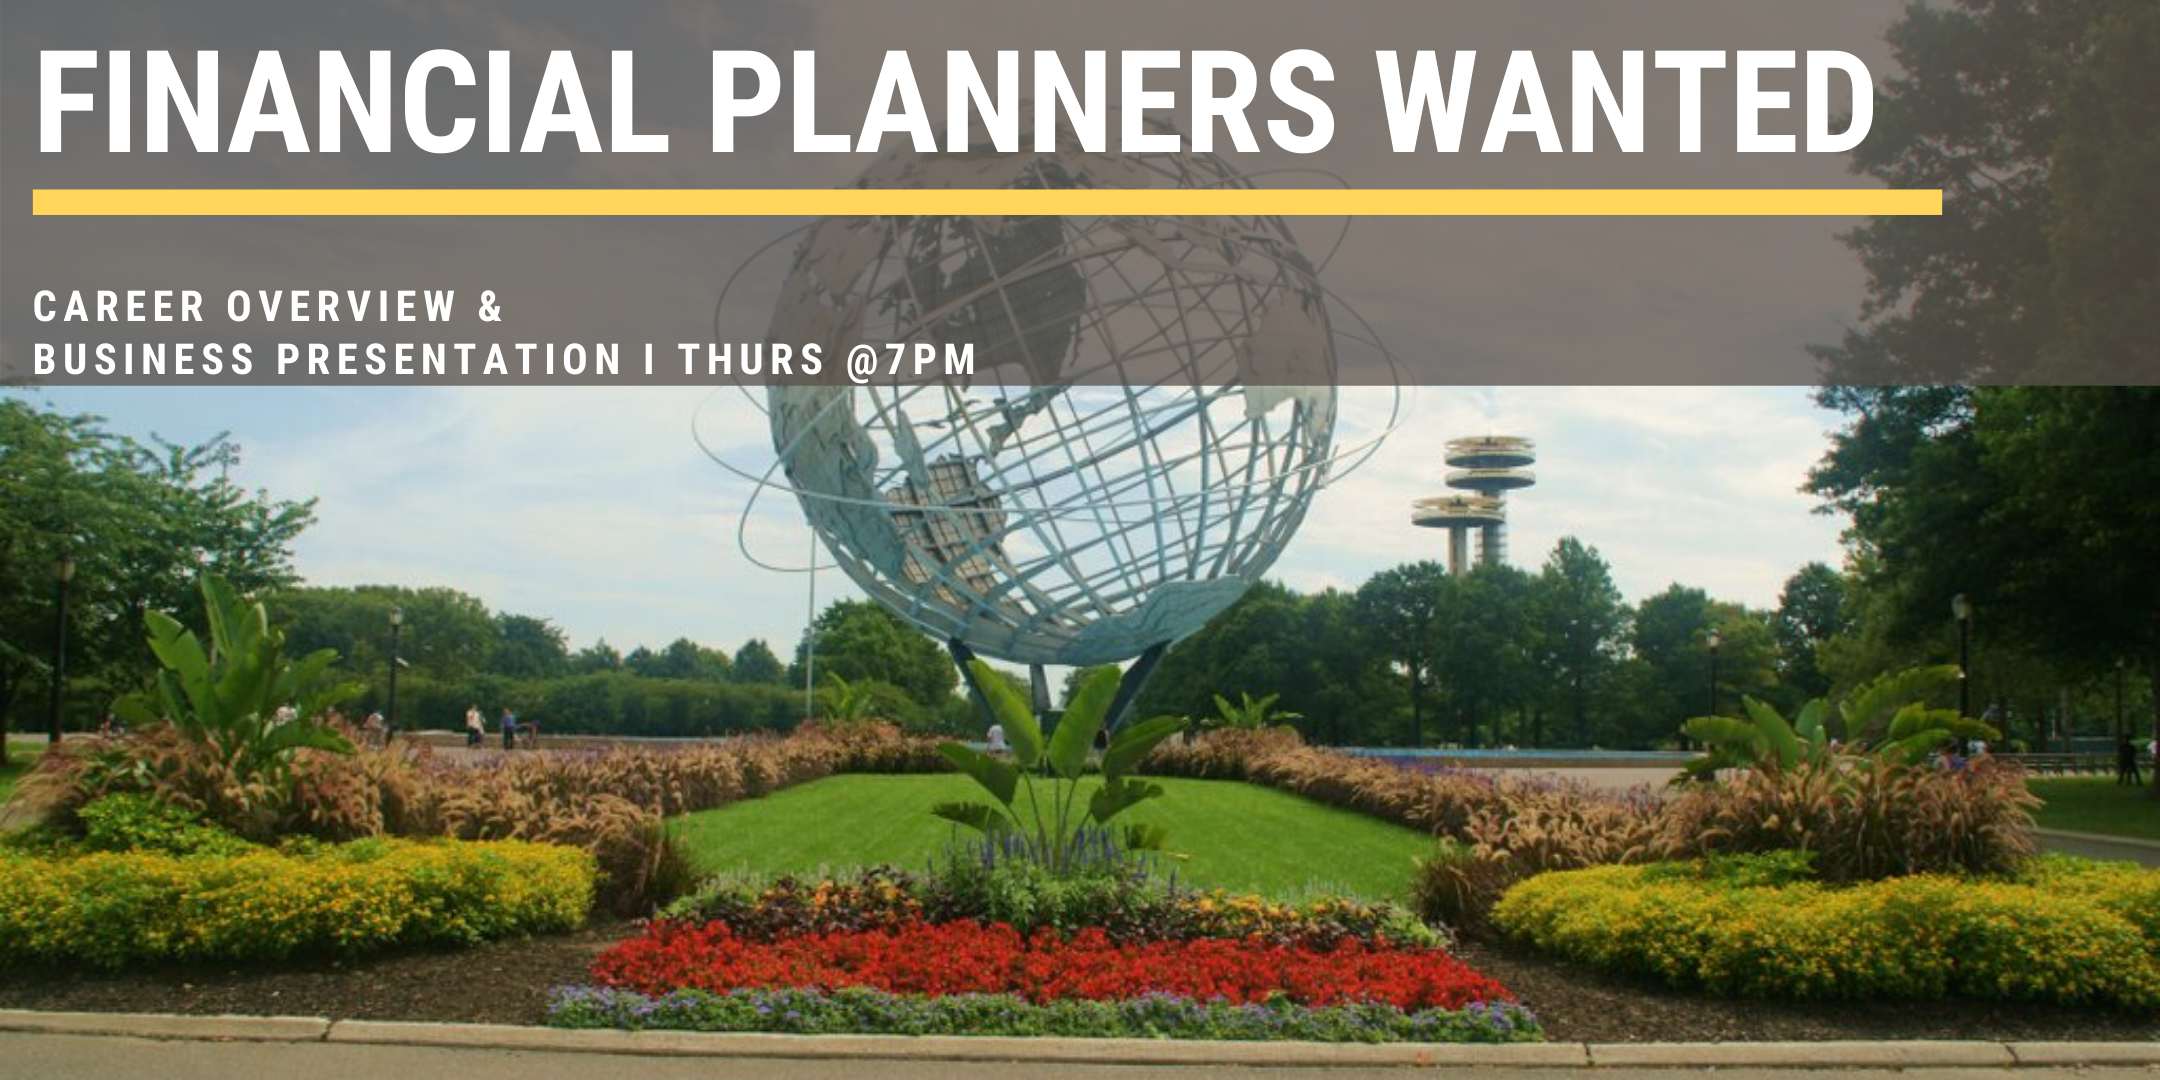 Financial Planners Wanted - Business Presentation Meeting (Queens, NY)